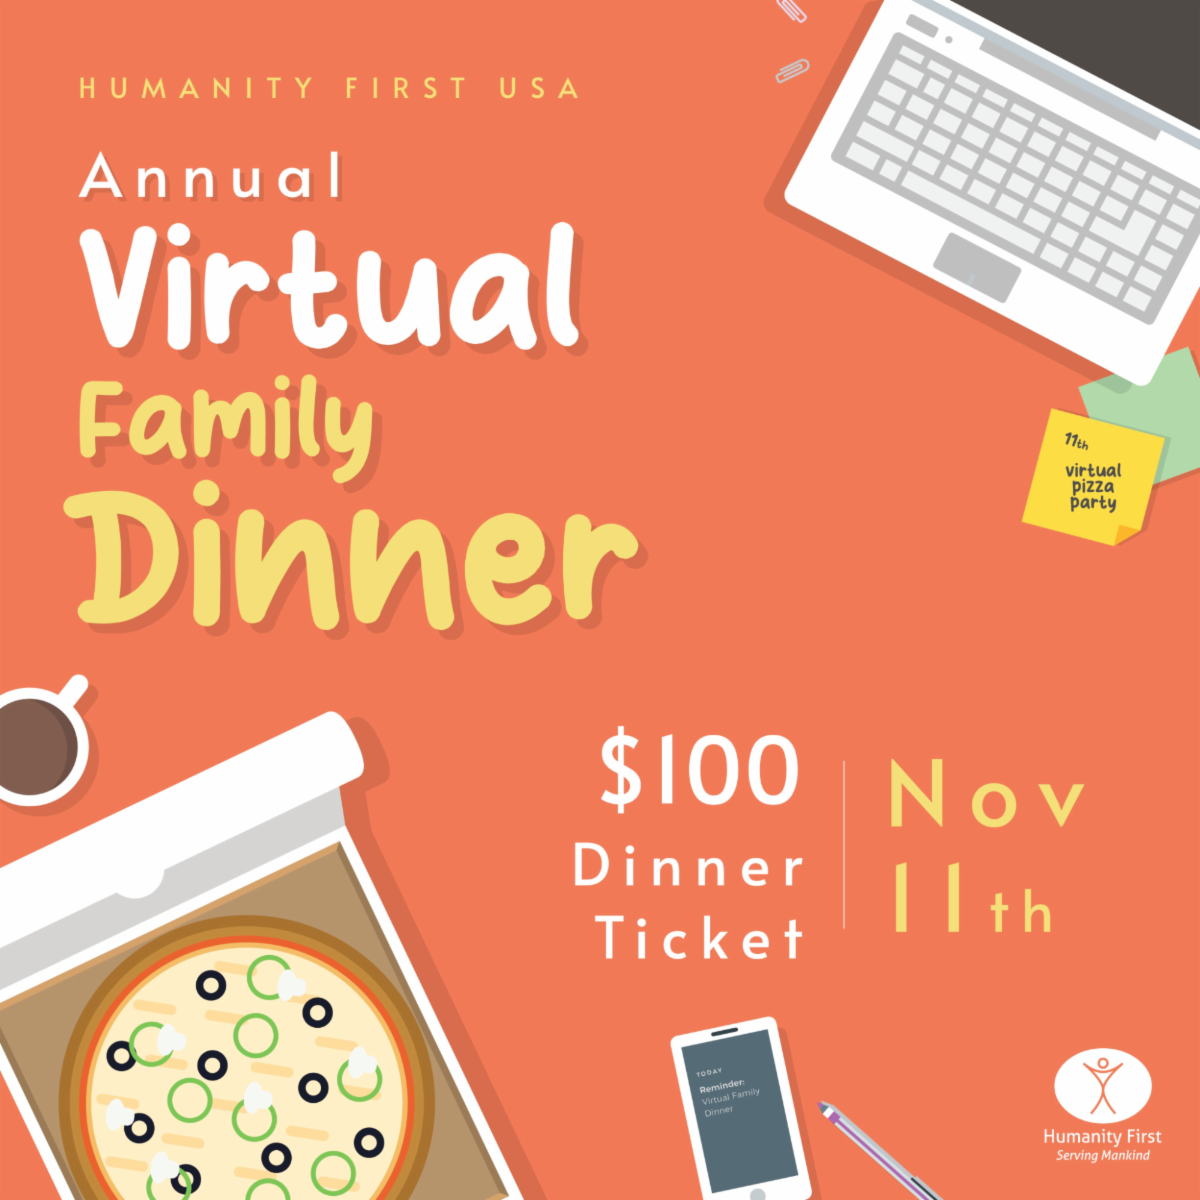 A drawn image of an open pizza box and laptop with tex reading Humanity First USA Annual Virtual Family Dinner Nov 11th $100 ticket.